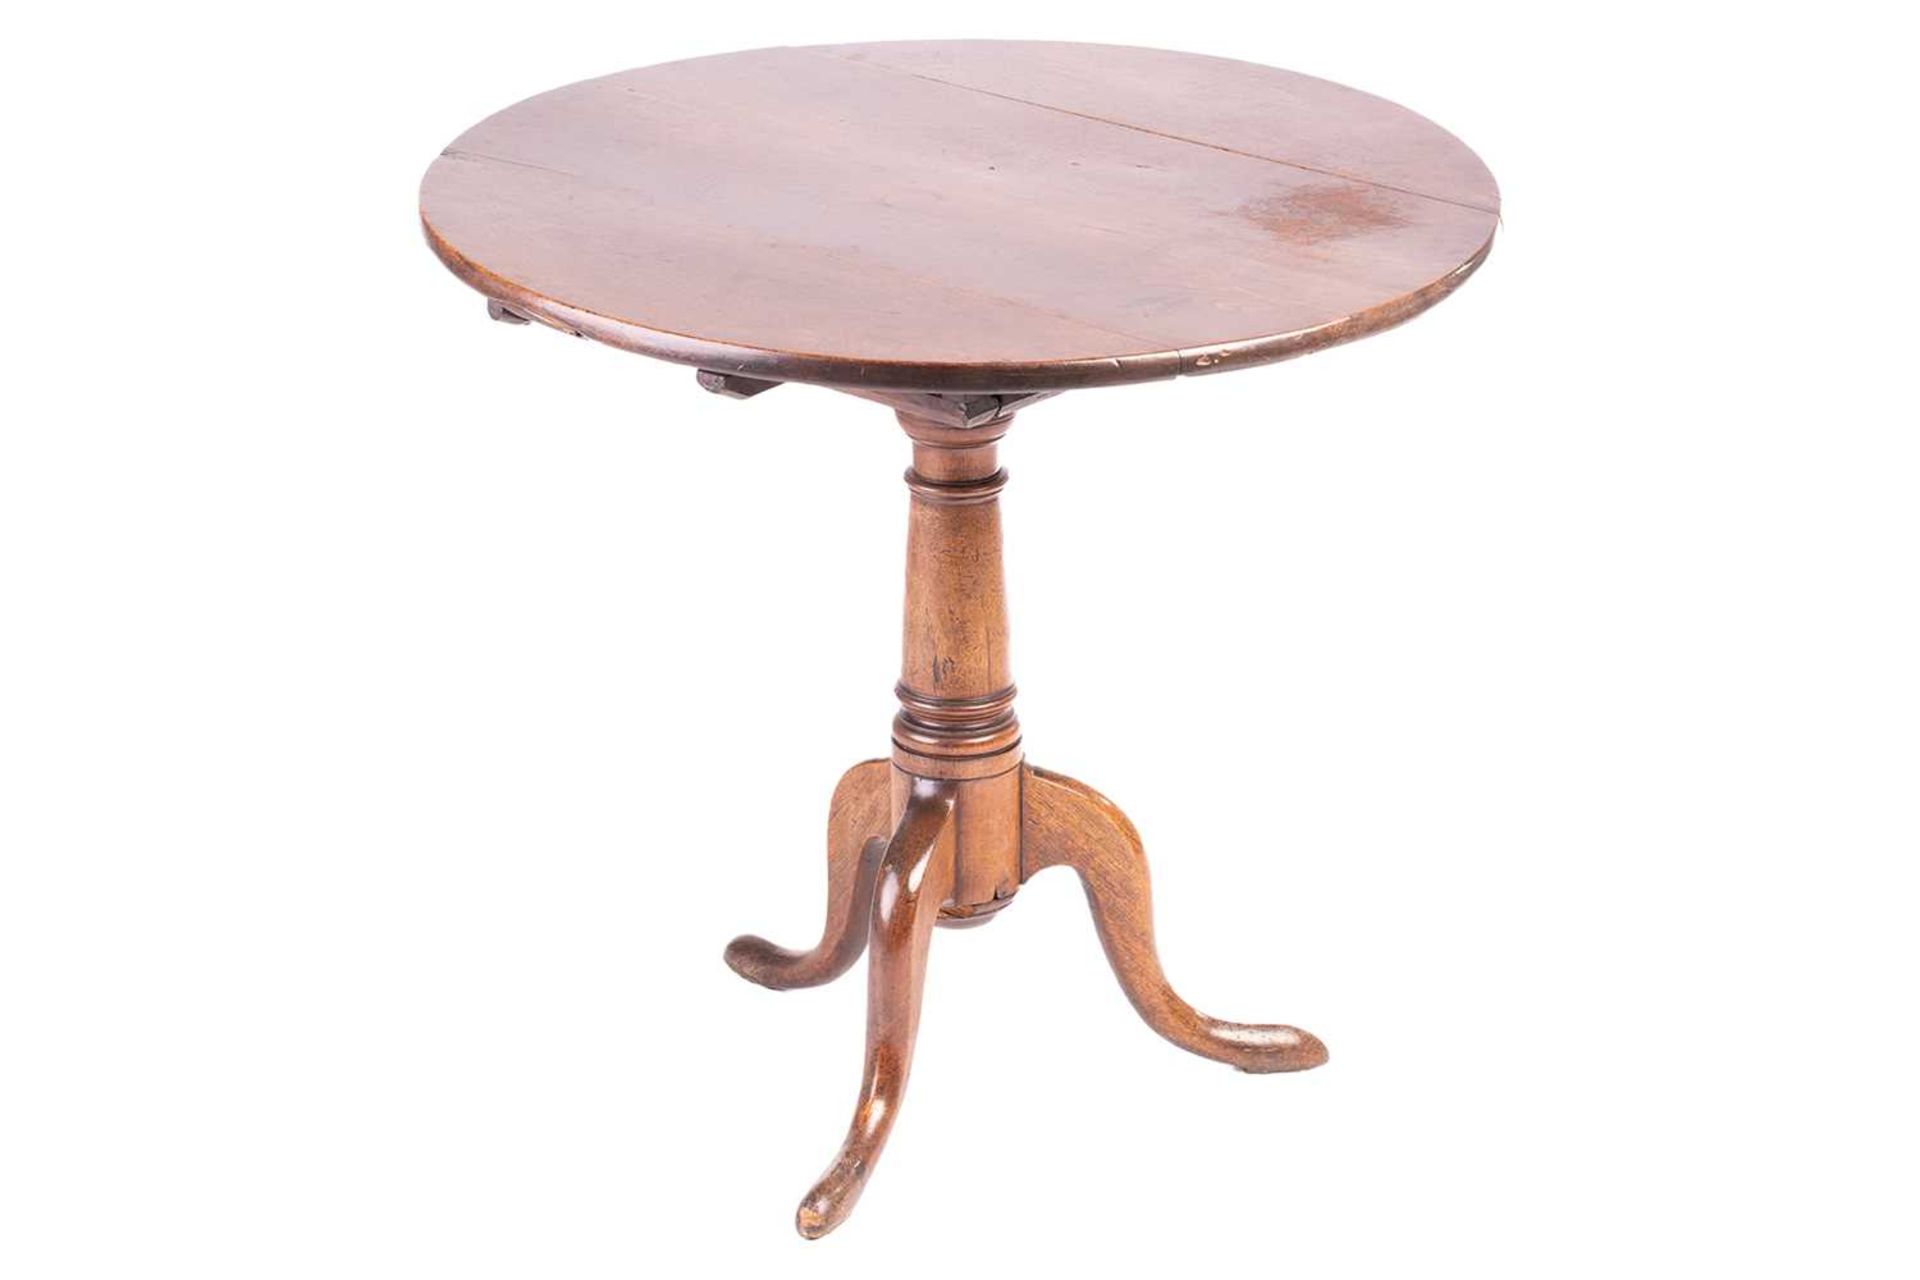 A 19th-century vernacular fruitwood snap-top tripod table, probably Welsh, with a planked top and bo - Bild 3 aus 5